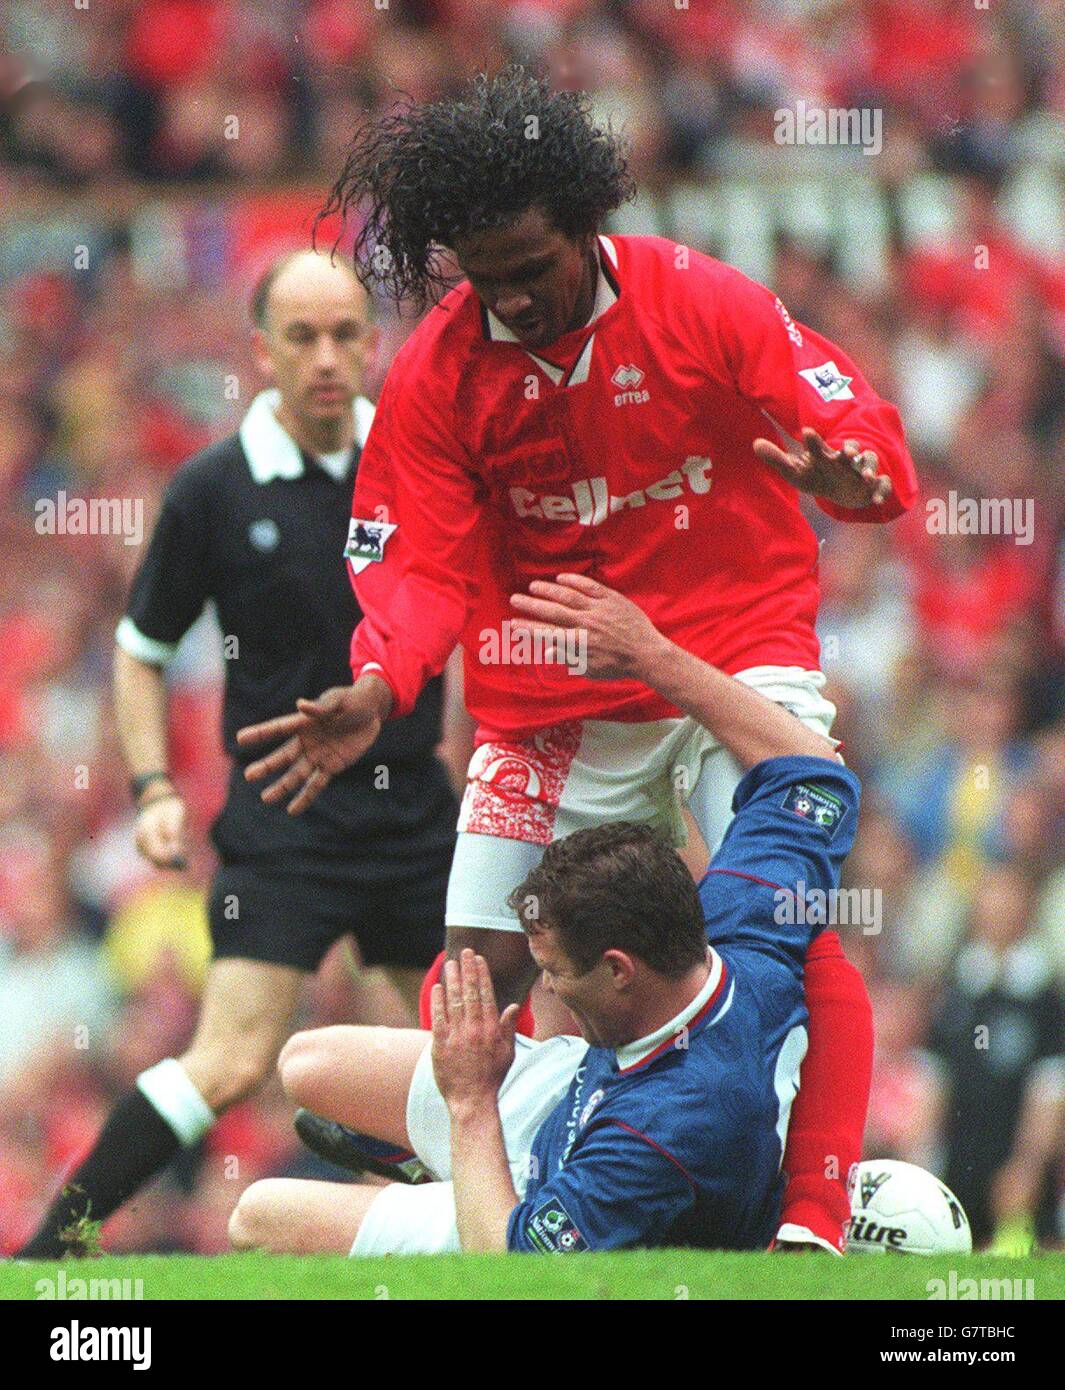 Soccer - Littlewoods FA Cup - Semi Final - Chesterfield v Middlesbrough. Emerson, Middlesbrough tries to avoid the sliding Paul Holland, Chesterfield Stock Photo